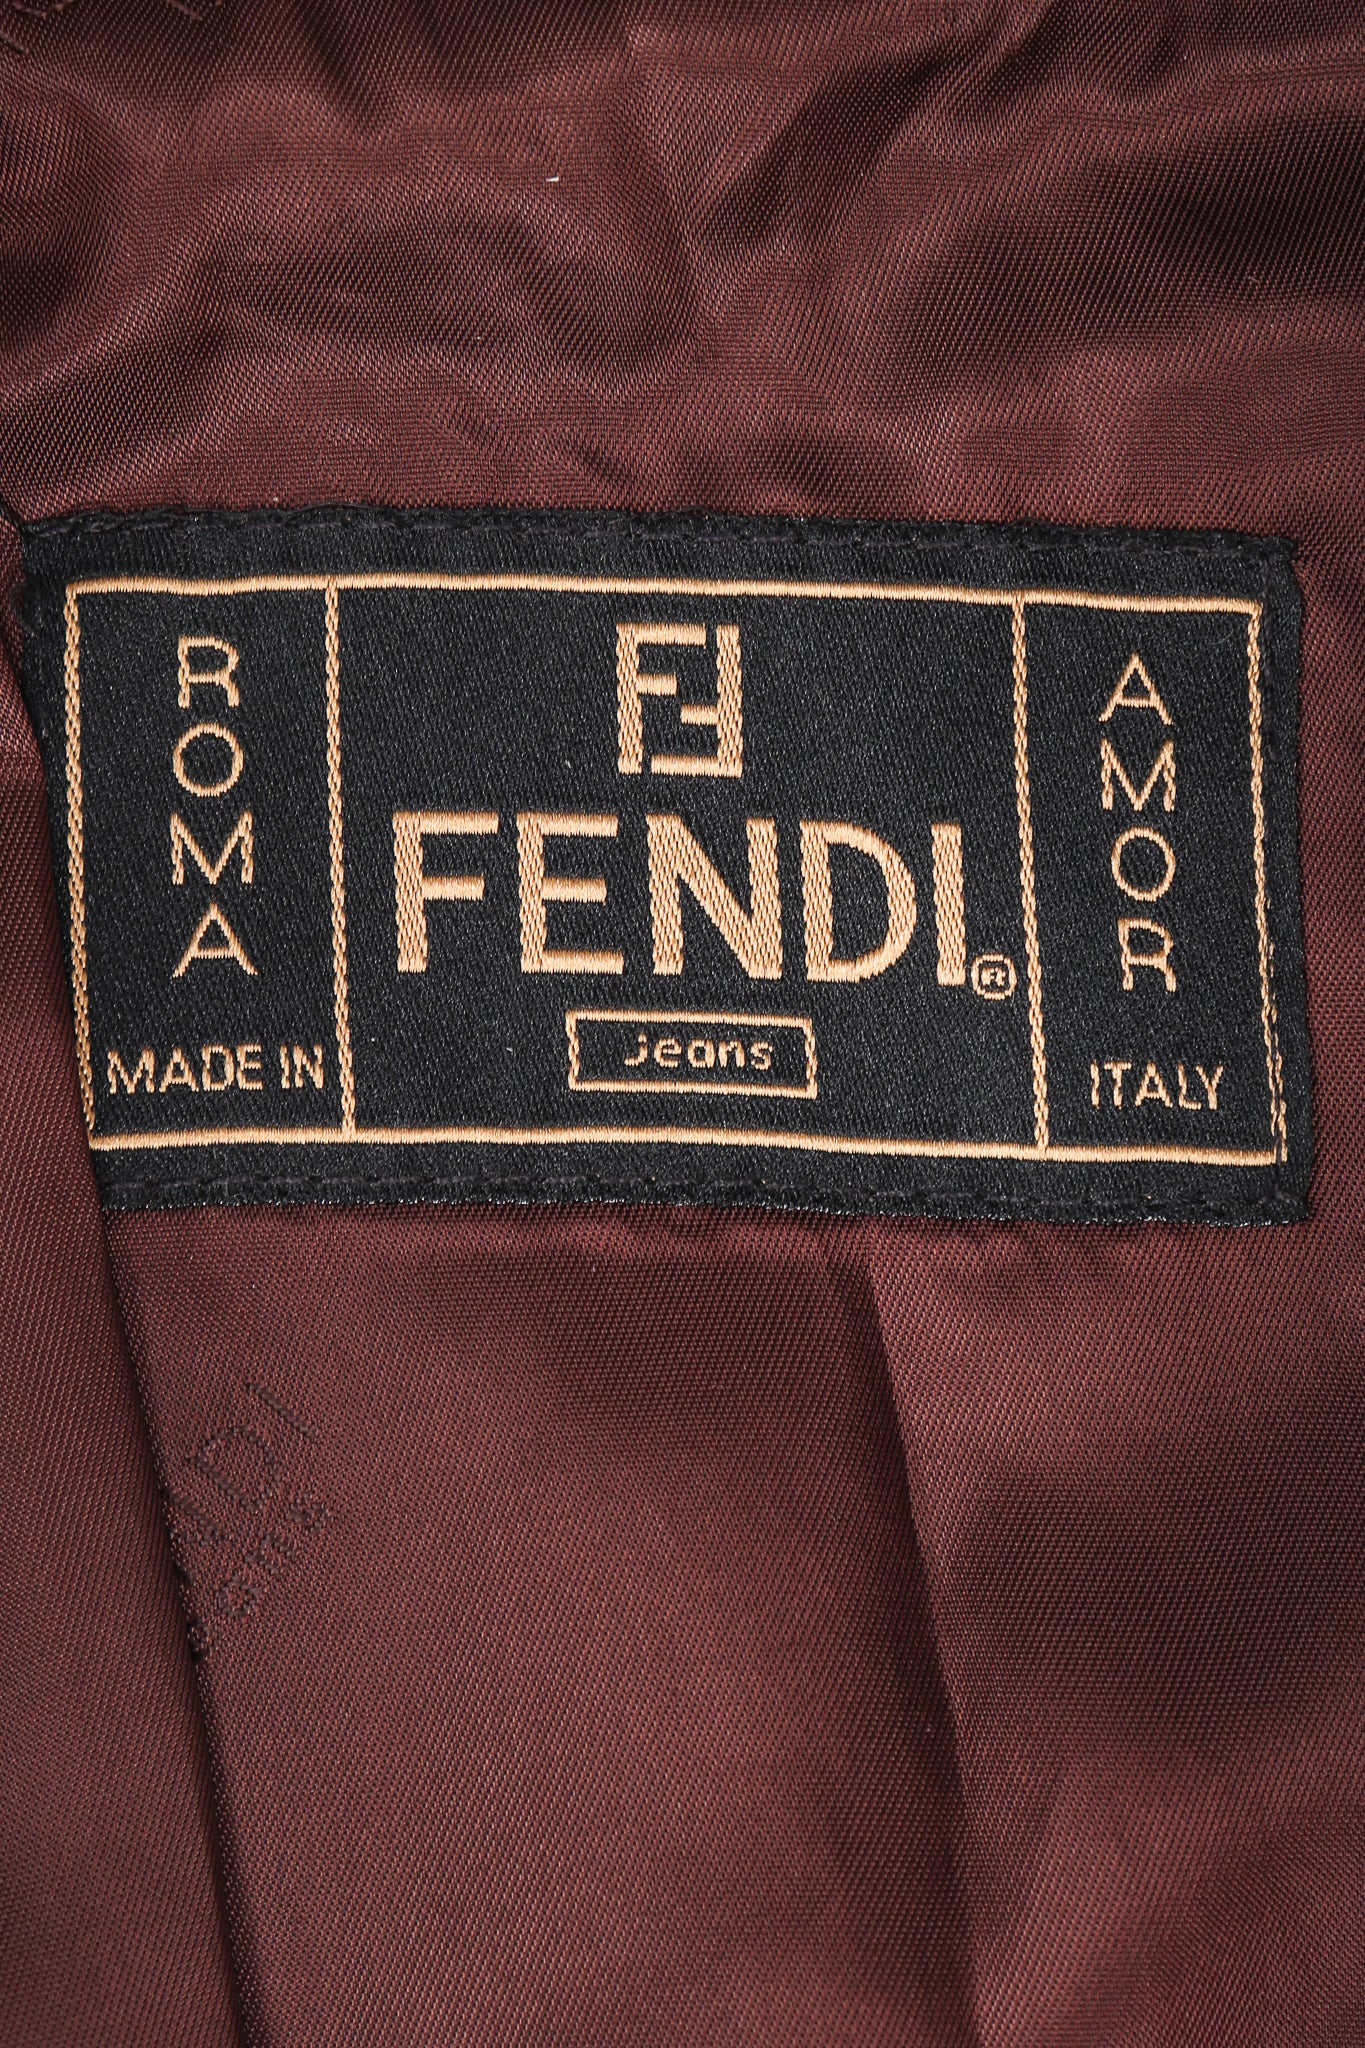 Recess Vintage Fendi Label on Brown Lining Fabric of Trench Coat